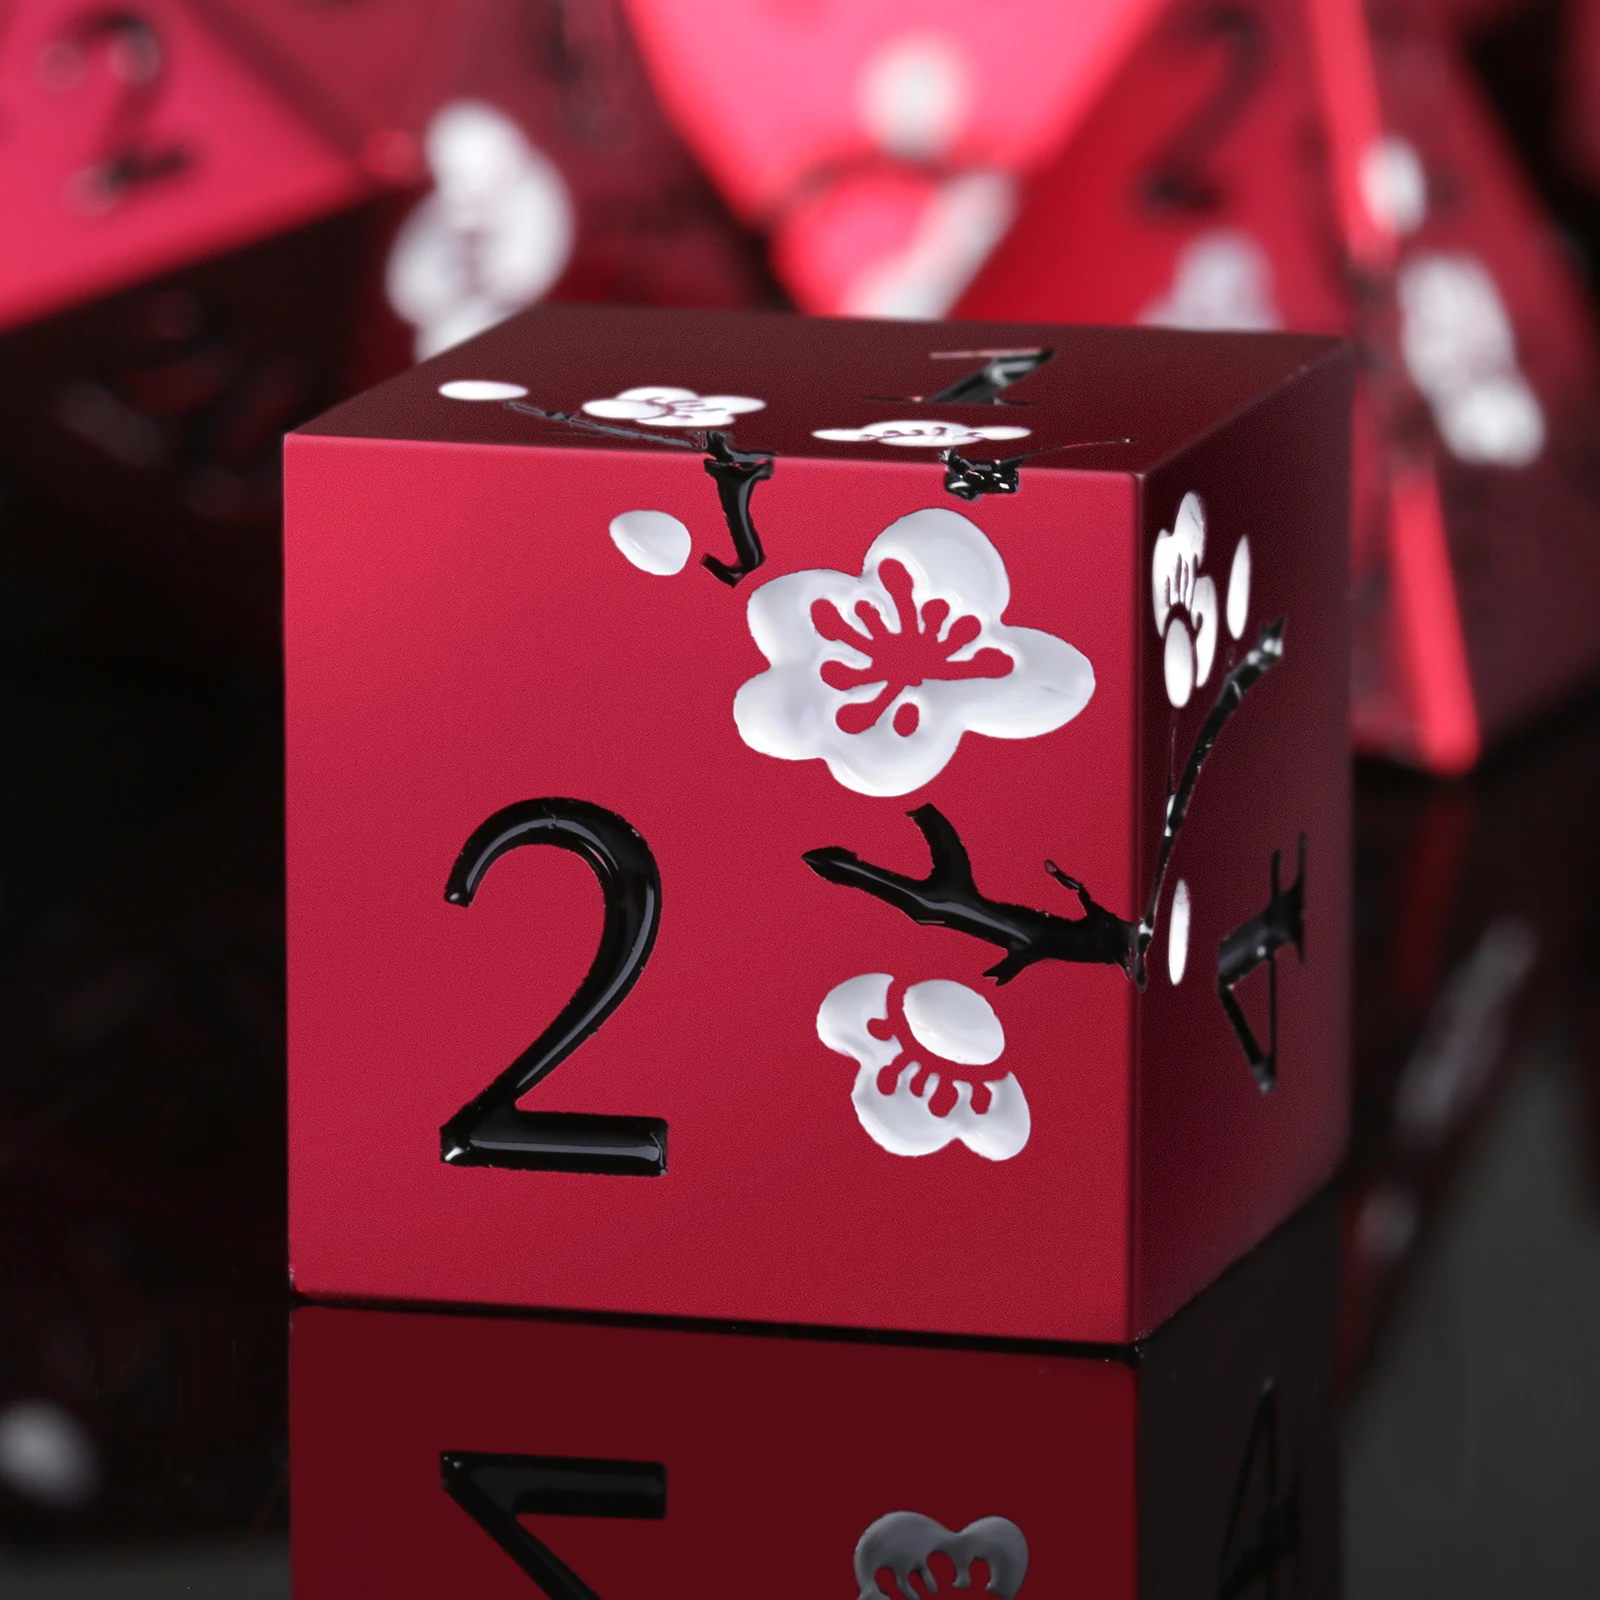 

New Style Polyhedral Metal DND dice Bulk Custom Metal Dice DnD Plum Blossom Metal Flower Dice Set D&D for RPG Games Red